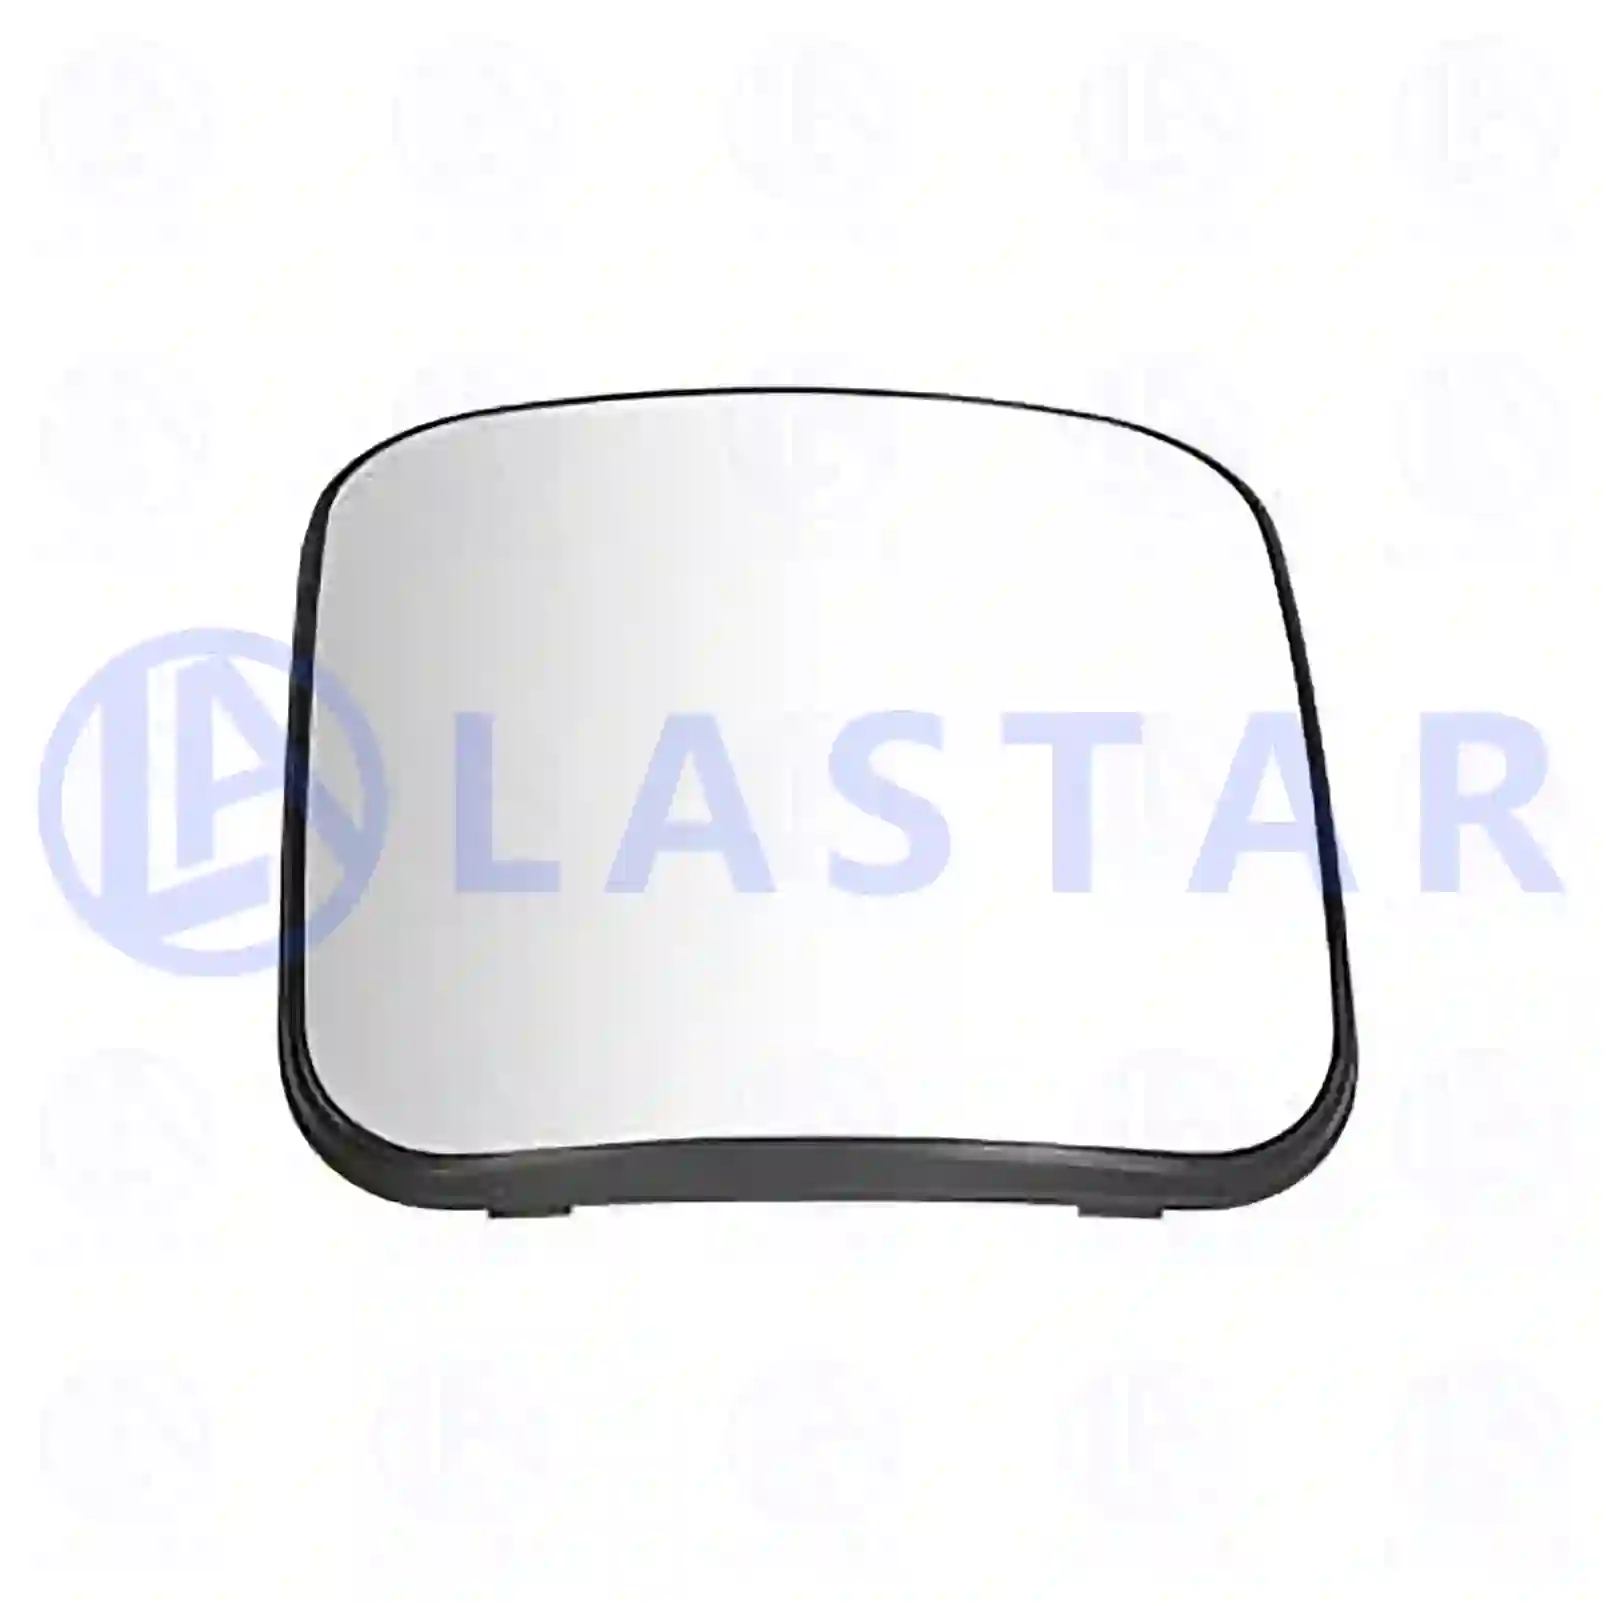 Mirror glass, wide view mirror, heated, 77718882, 0018116033, ZG61017-0008 ||  77718882 Lastar Spare Part | Truck Spare Parts, Auotomotive Spare Parts Mirror glass, wide view mirror, heated, 77718882, 0018116033, ZG61017-0008 ||  77718882 Lastar Spare Part | Truck Spare Parts, Auotomotive Spare Parts